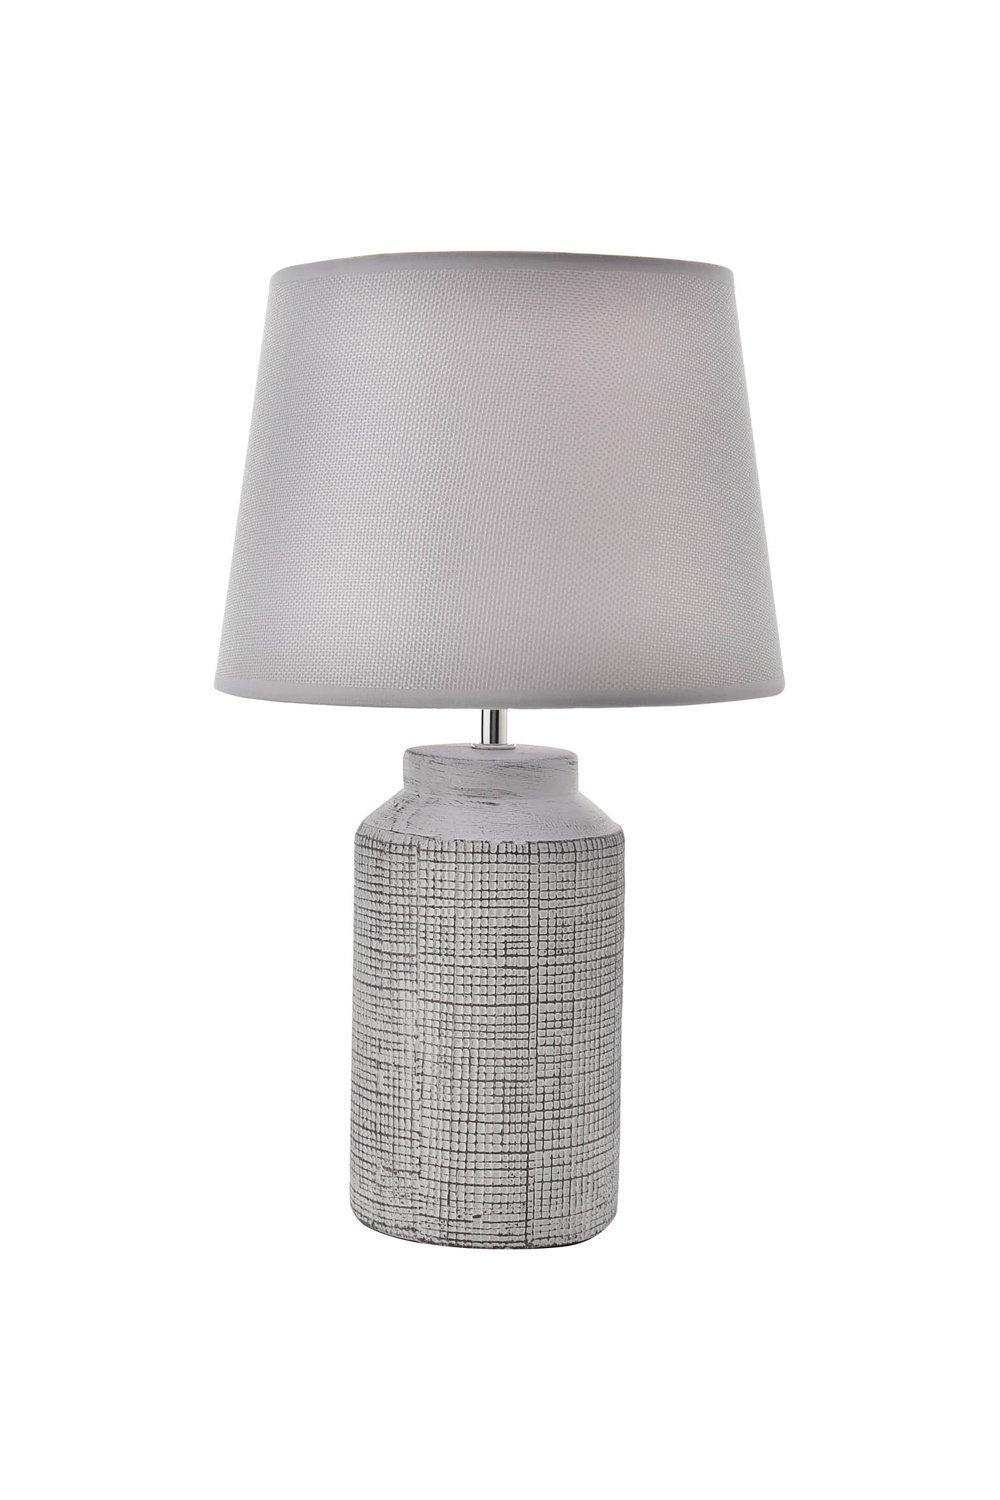 Textured White Table Lamp 41cm Tall